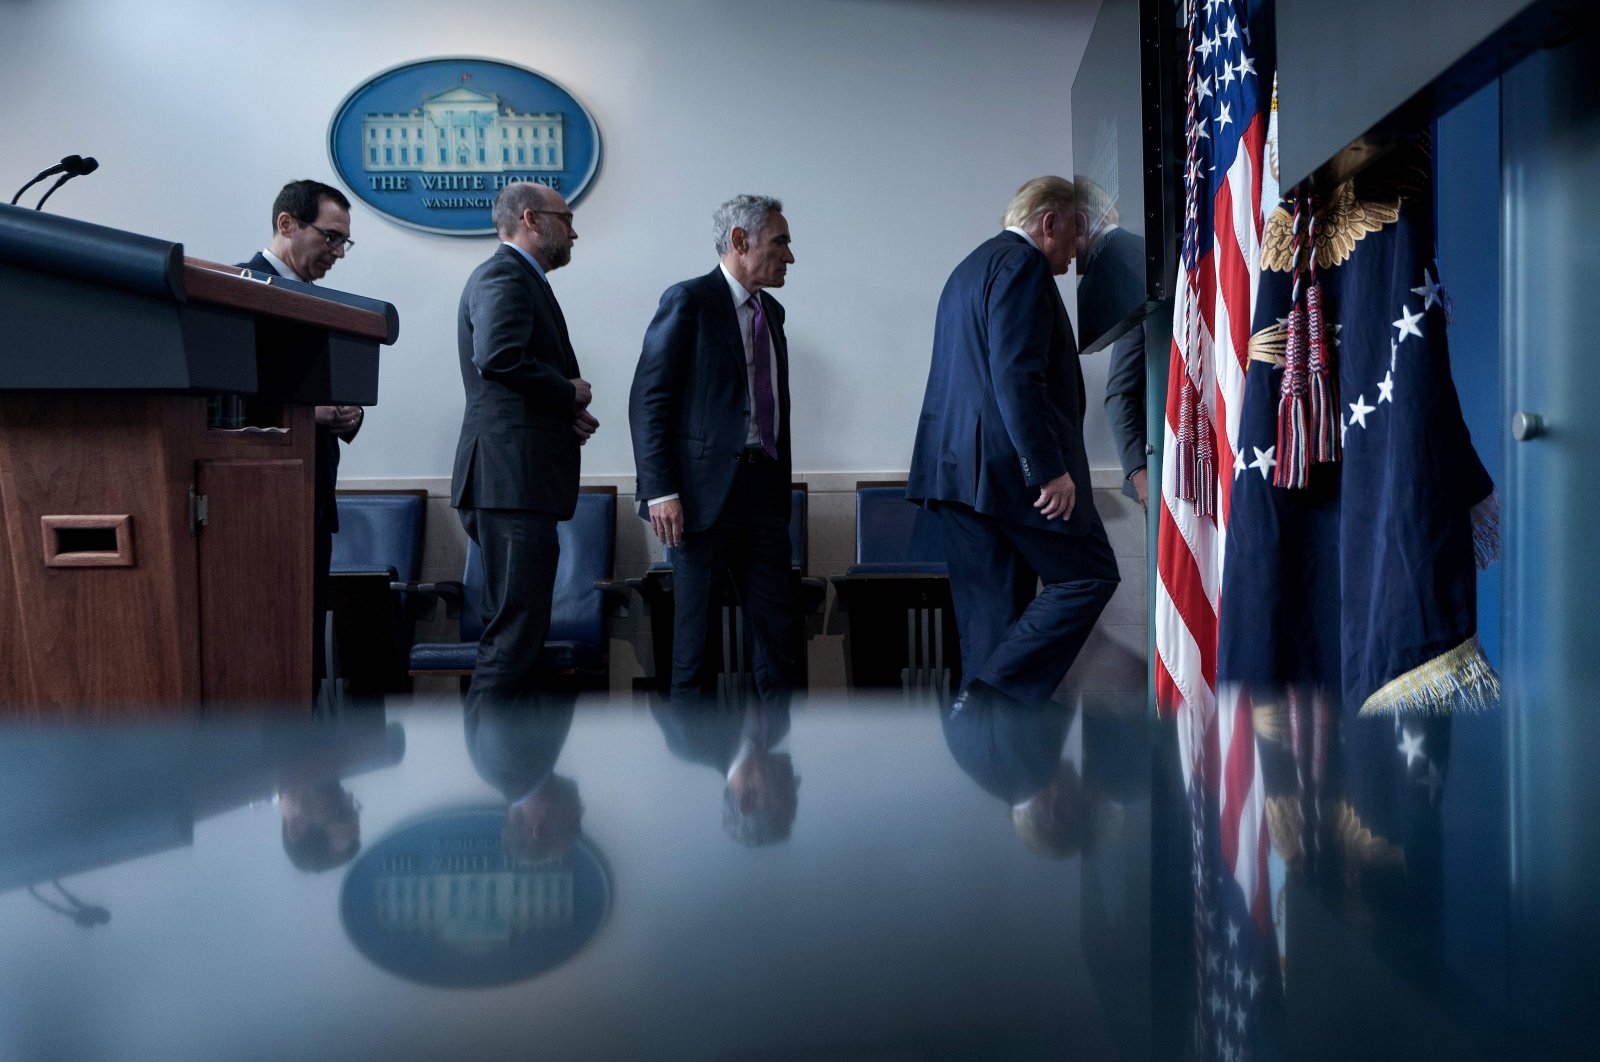 U.S. Secretary of the Treasury Steven Mnuchin, Director of the Office of Management and Budget Russell Vought, member of the coronavirus task force Scott Atlas, and U.S. President Donald Trump leave after a briefing at the White House, Aug. 10, 2020, in Washington, D.C. (AFP Photo)